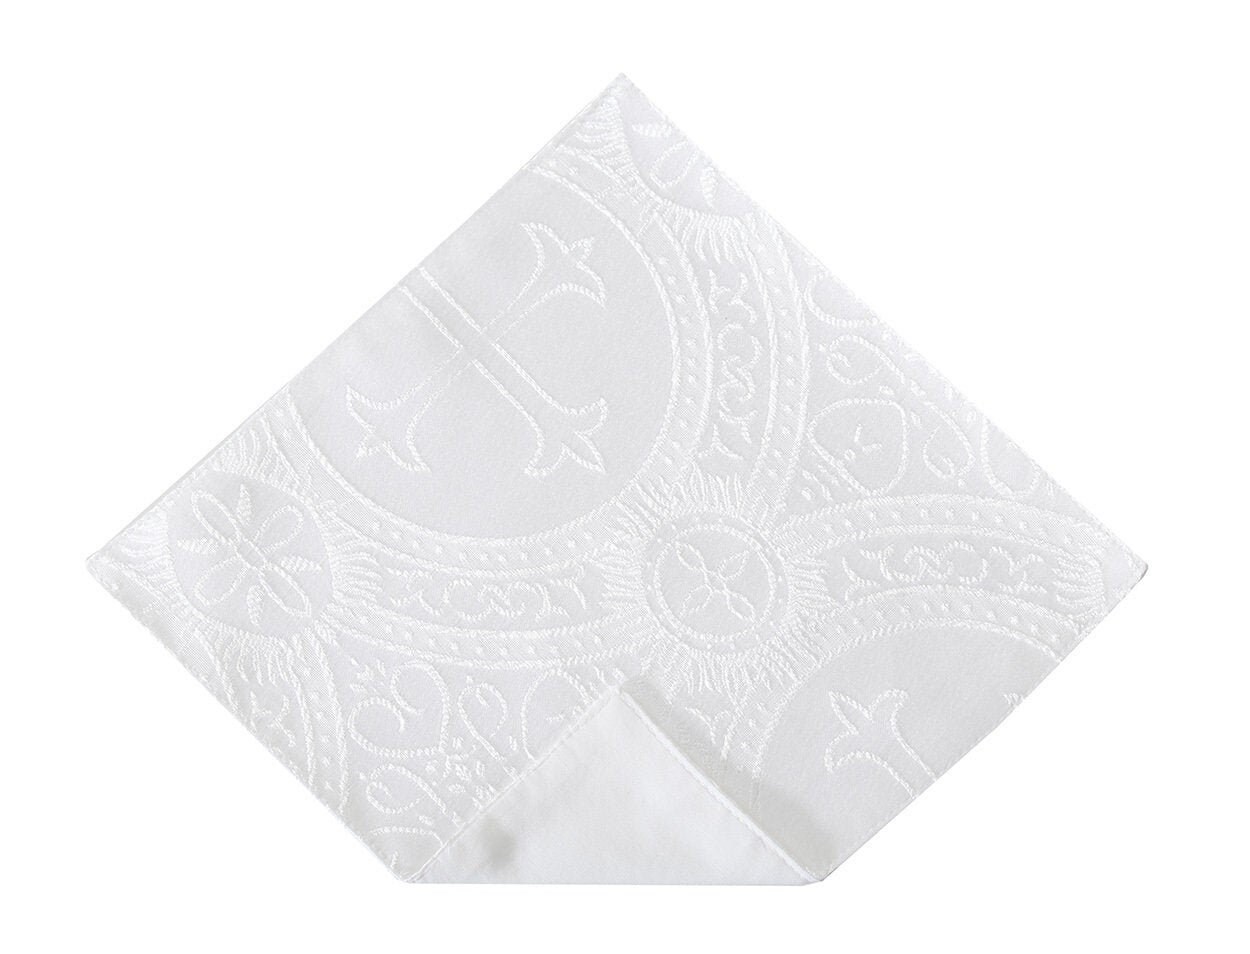 Religious Pocket Square - White Clergy Pattern Handkerchief for ...